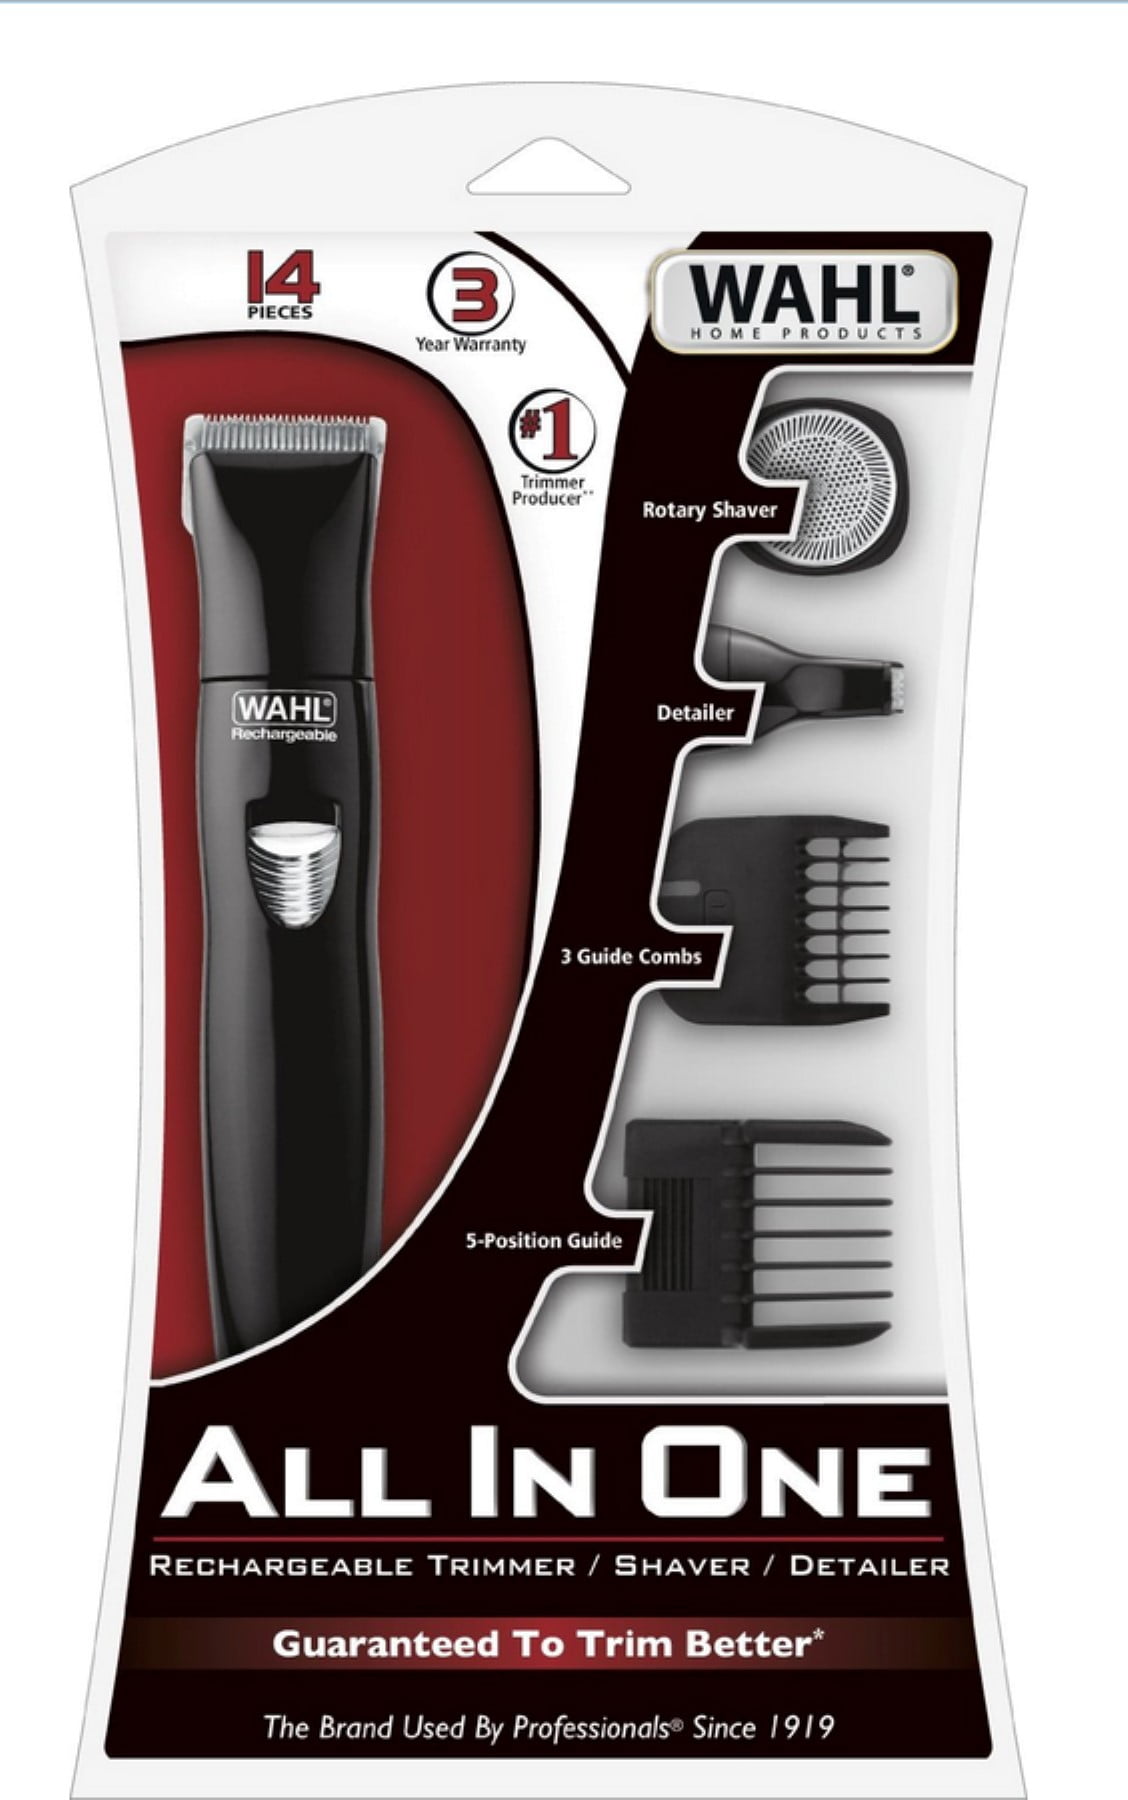 babyliss 10 in 1 titanium groomer review